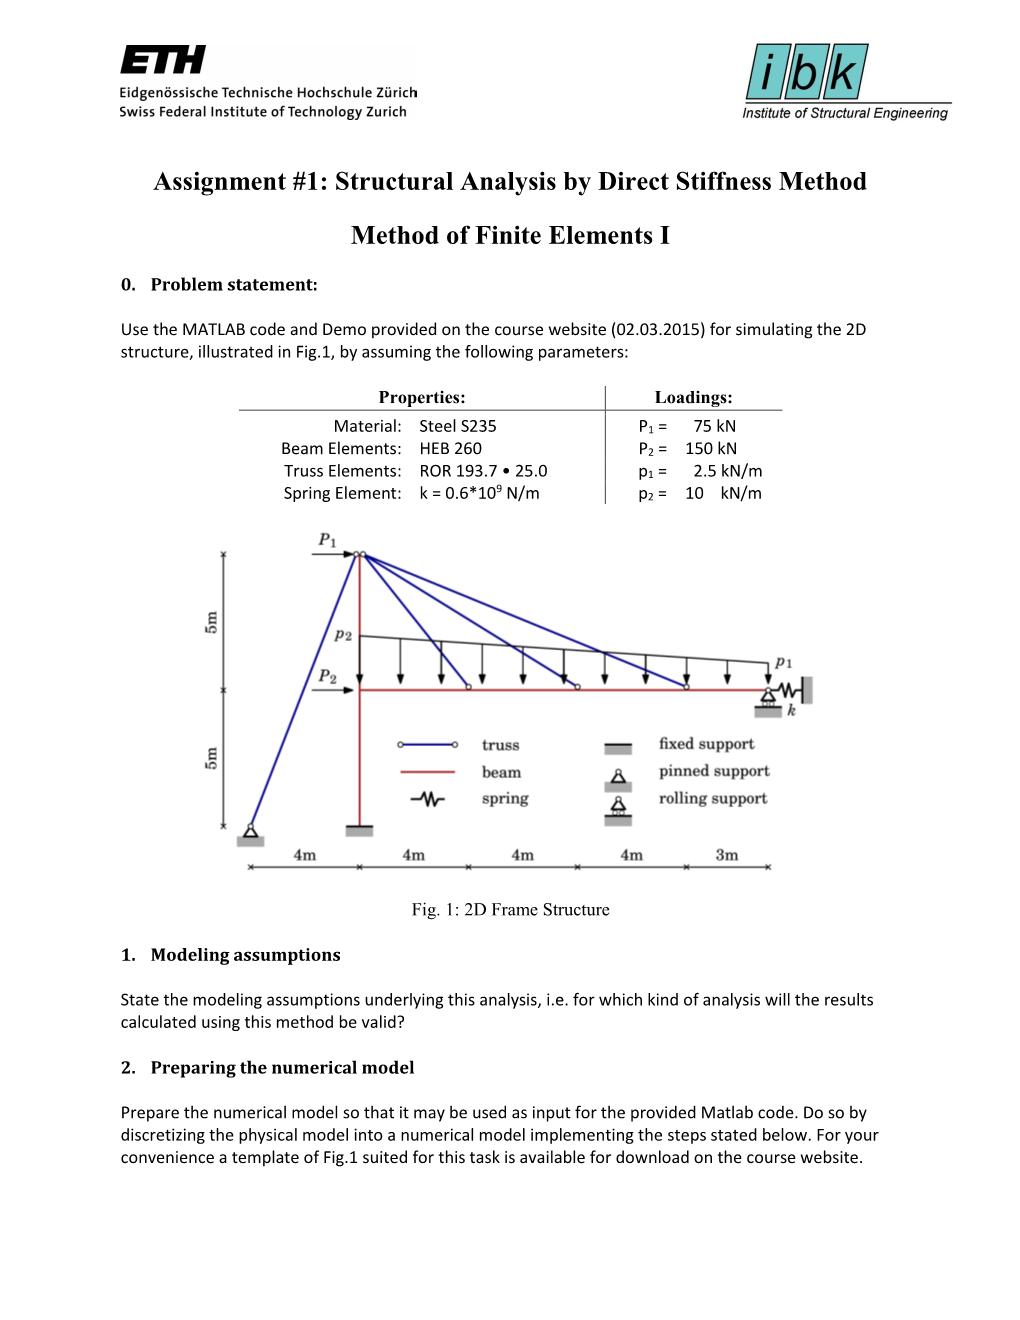 Assignment #1: Structural Analysis by Direct Stiffness Method Method of Finite Elements I